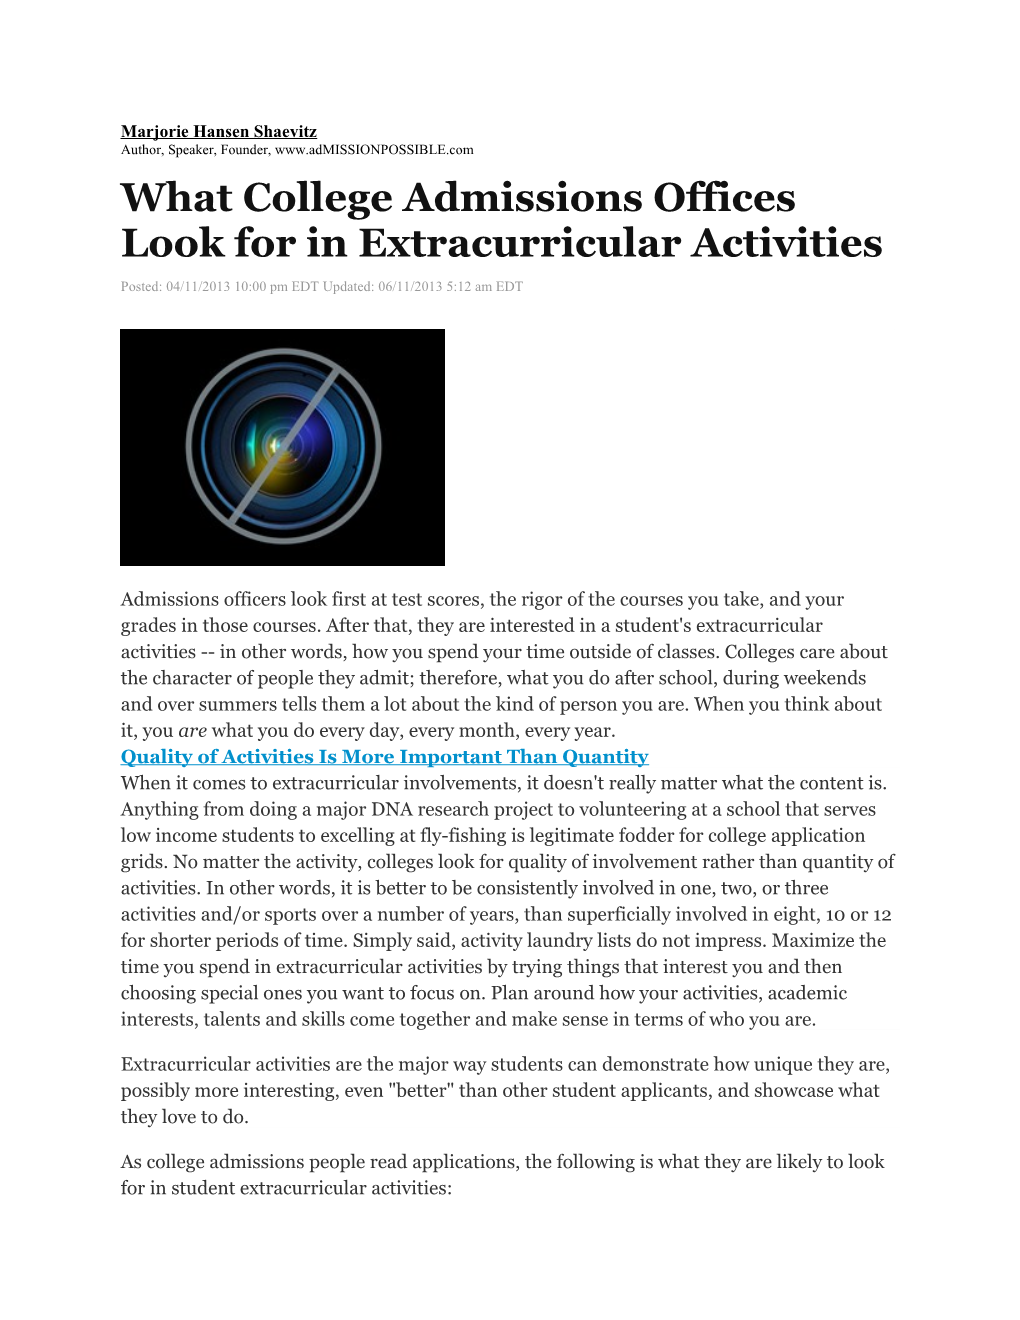 What College Admissions Offices Look for in Extracurricular Activities